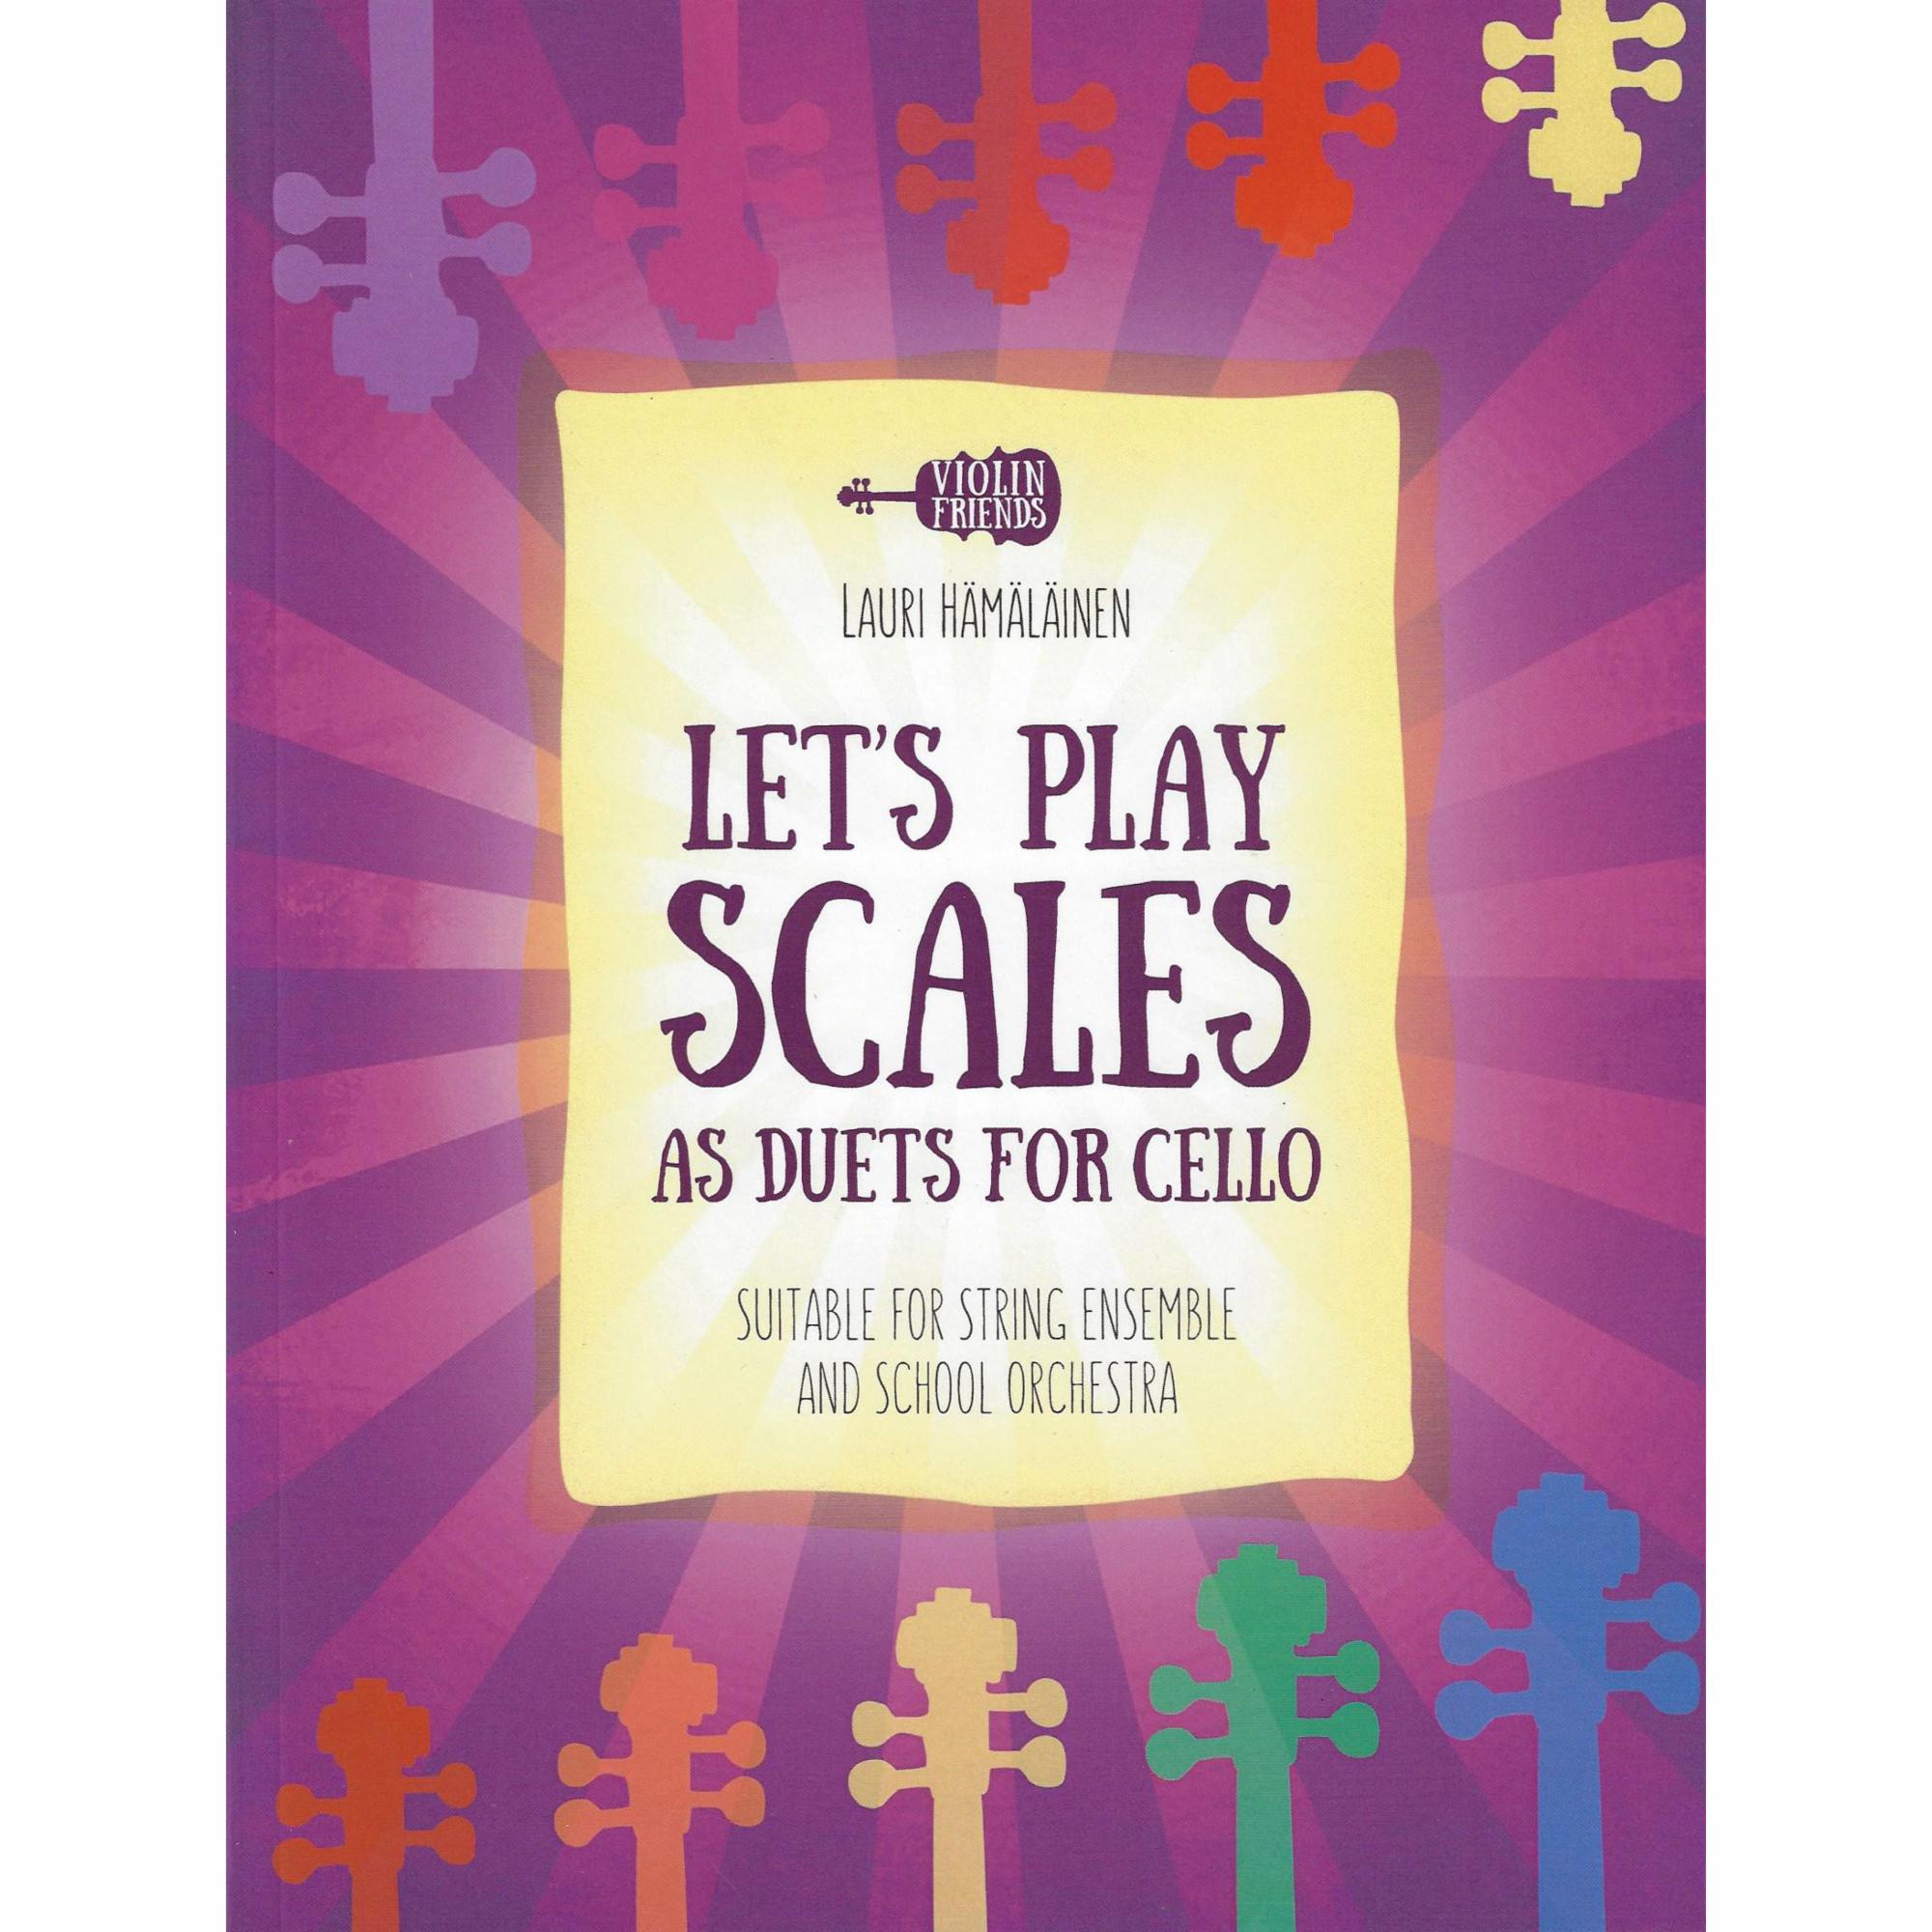 Violin Friends: Let's Play Scales as Duets for Violin, Viola, or Cello